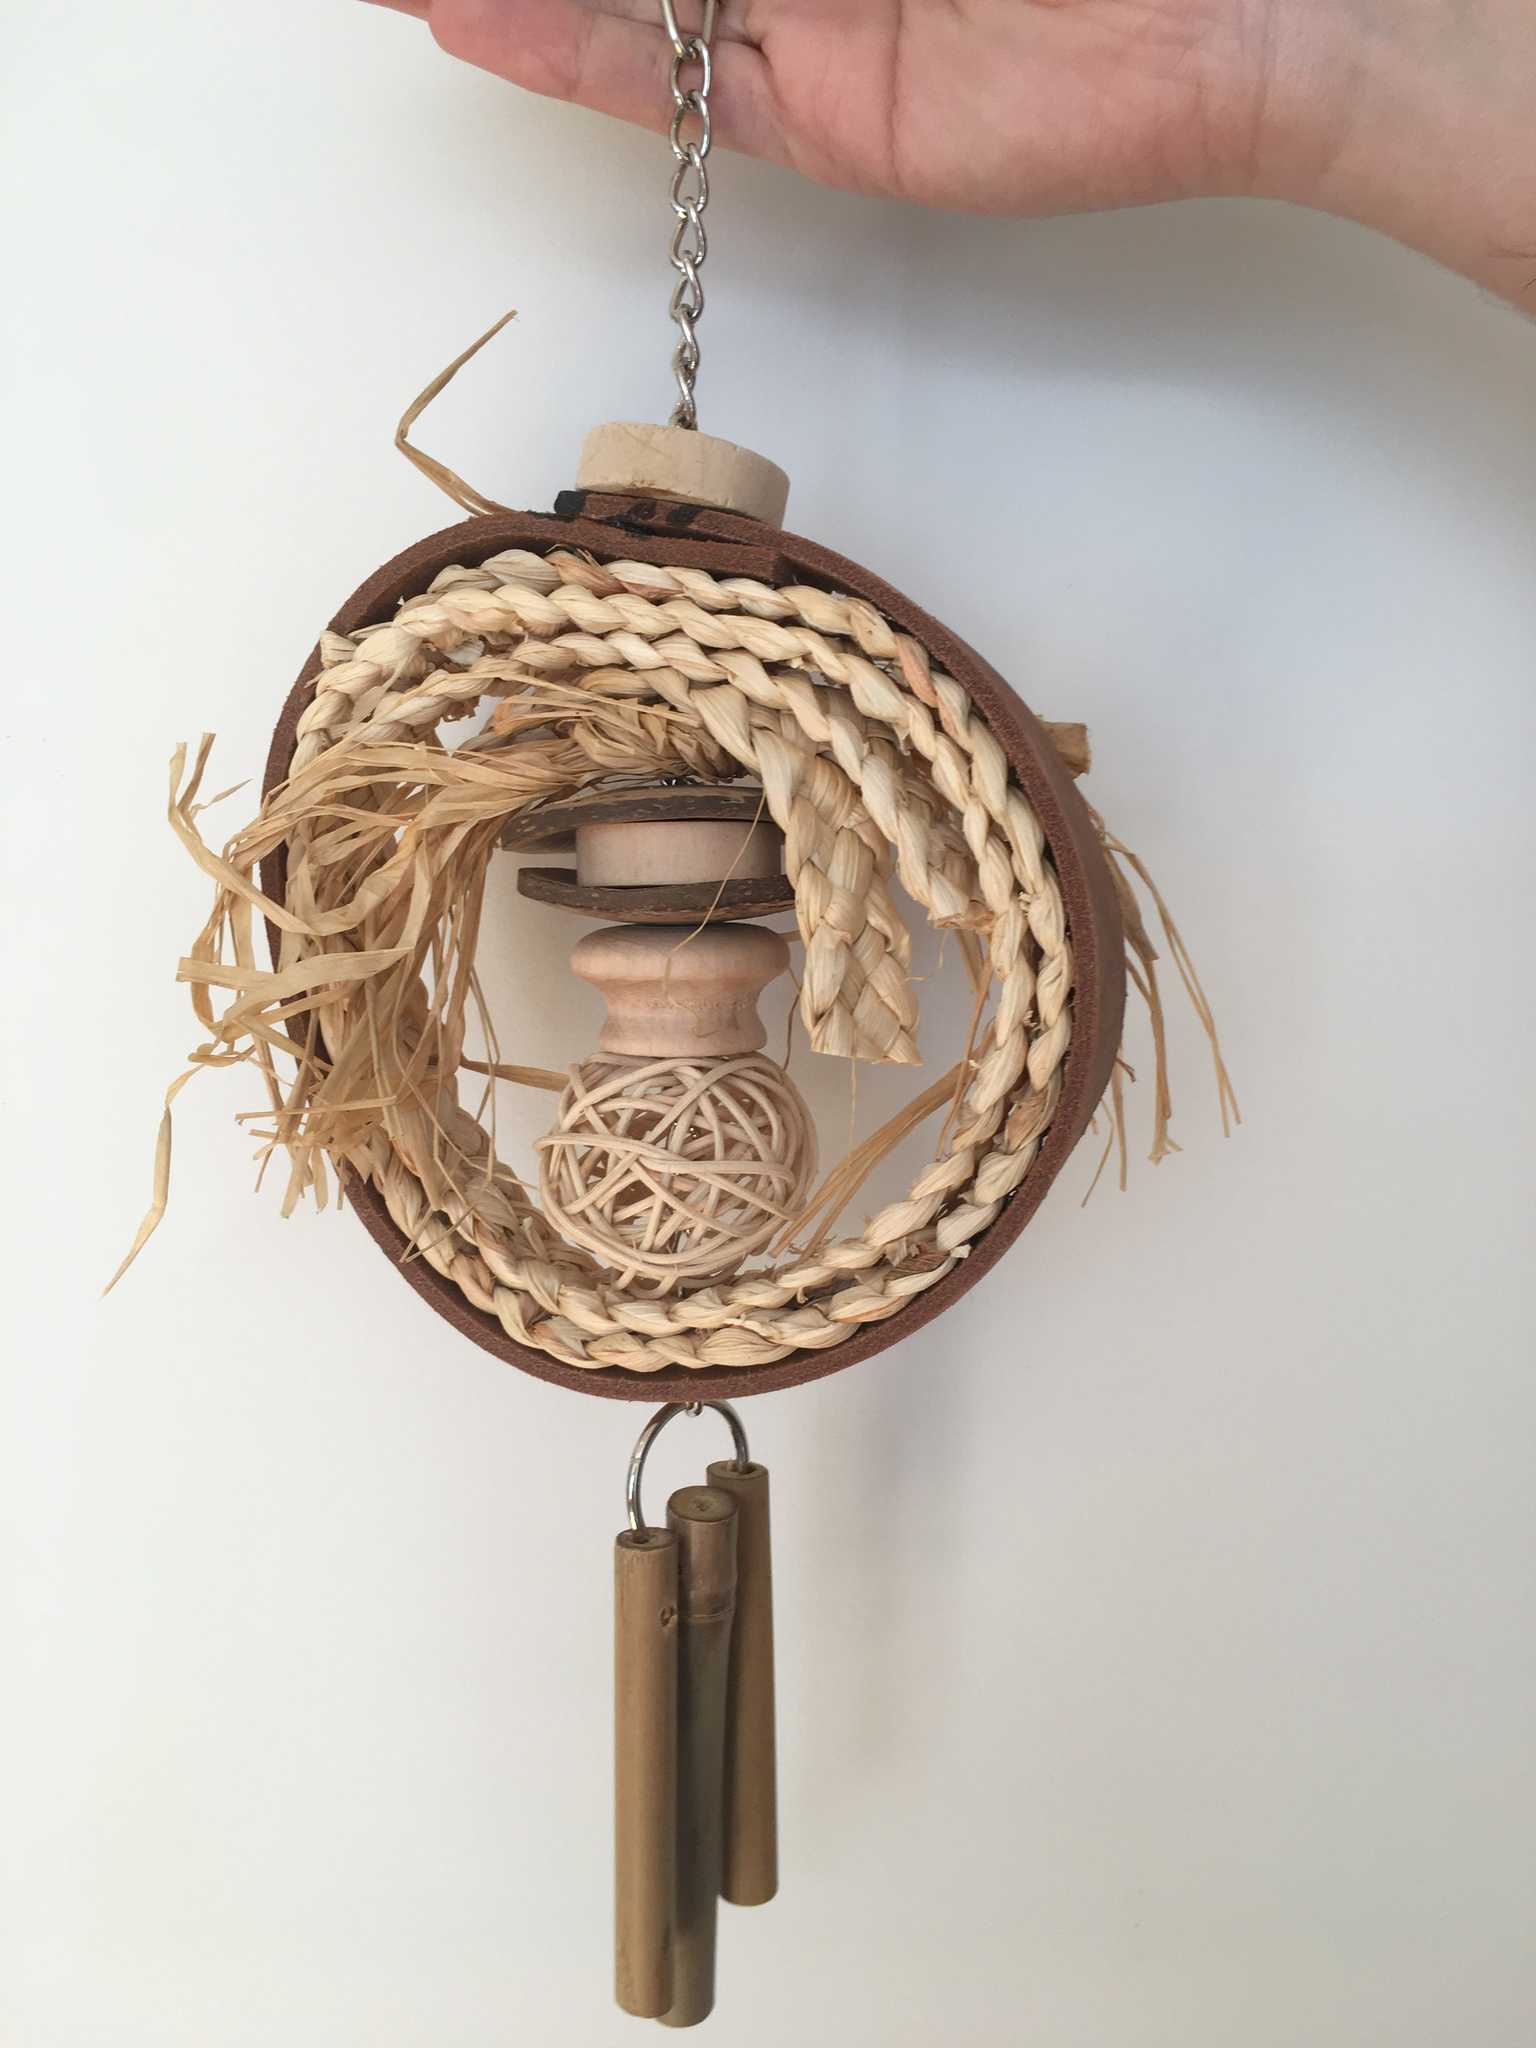 A natural hanging toy for parrots with a ring of sisal weave inside and some dangly chimes. Once the ropes are chewed up, the ring could become a swing.